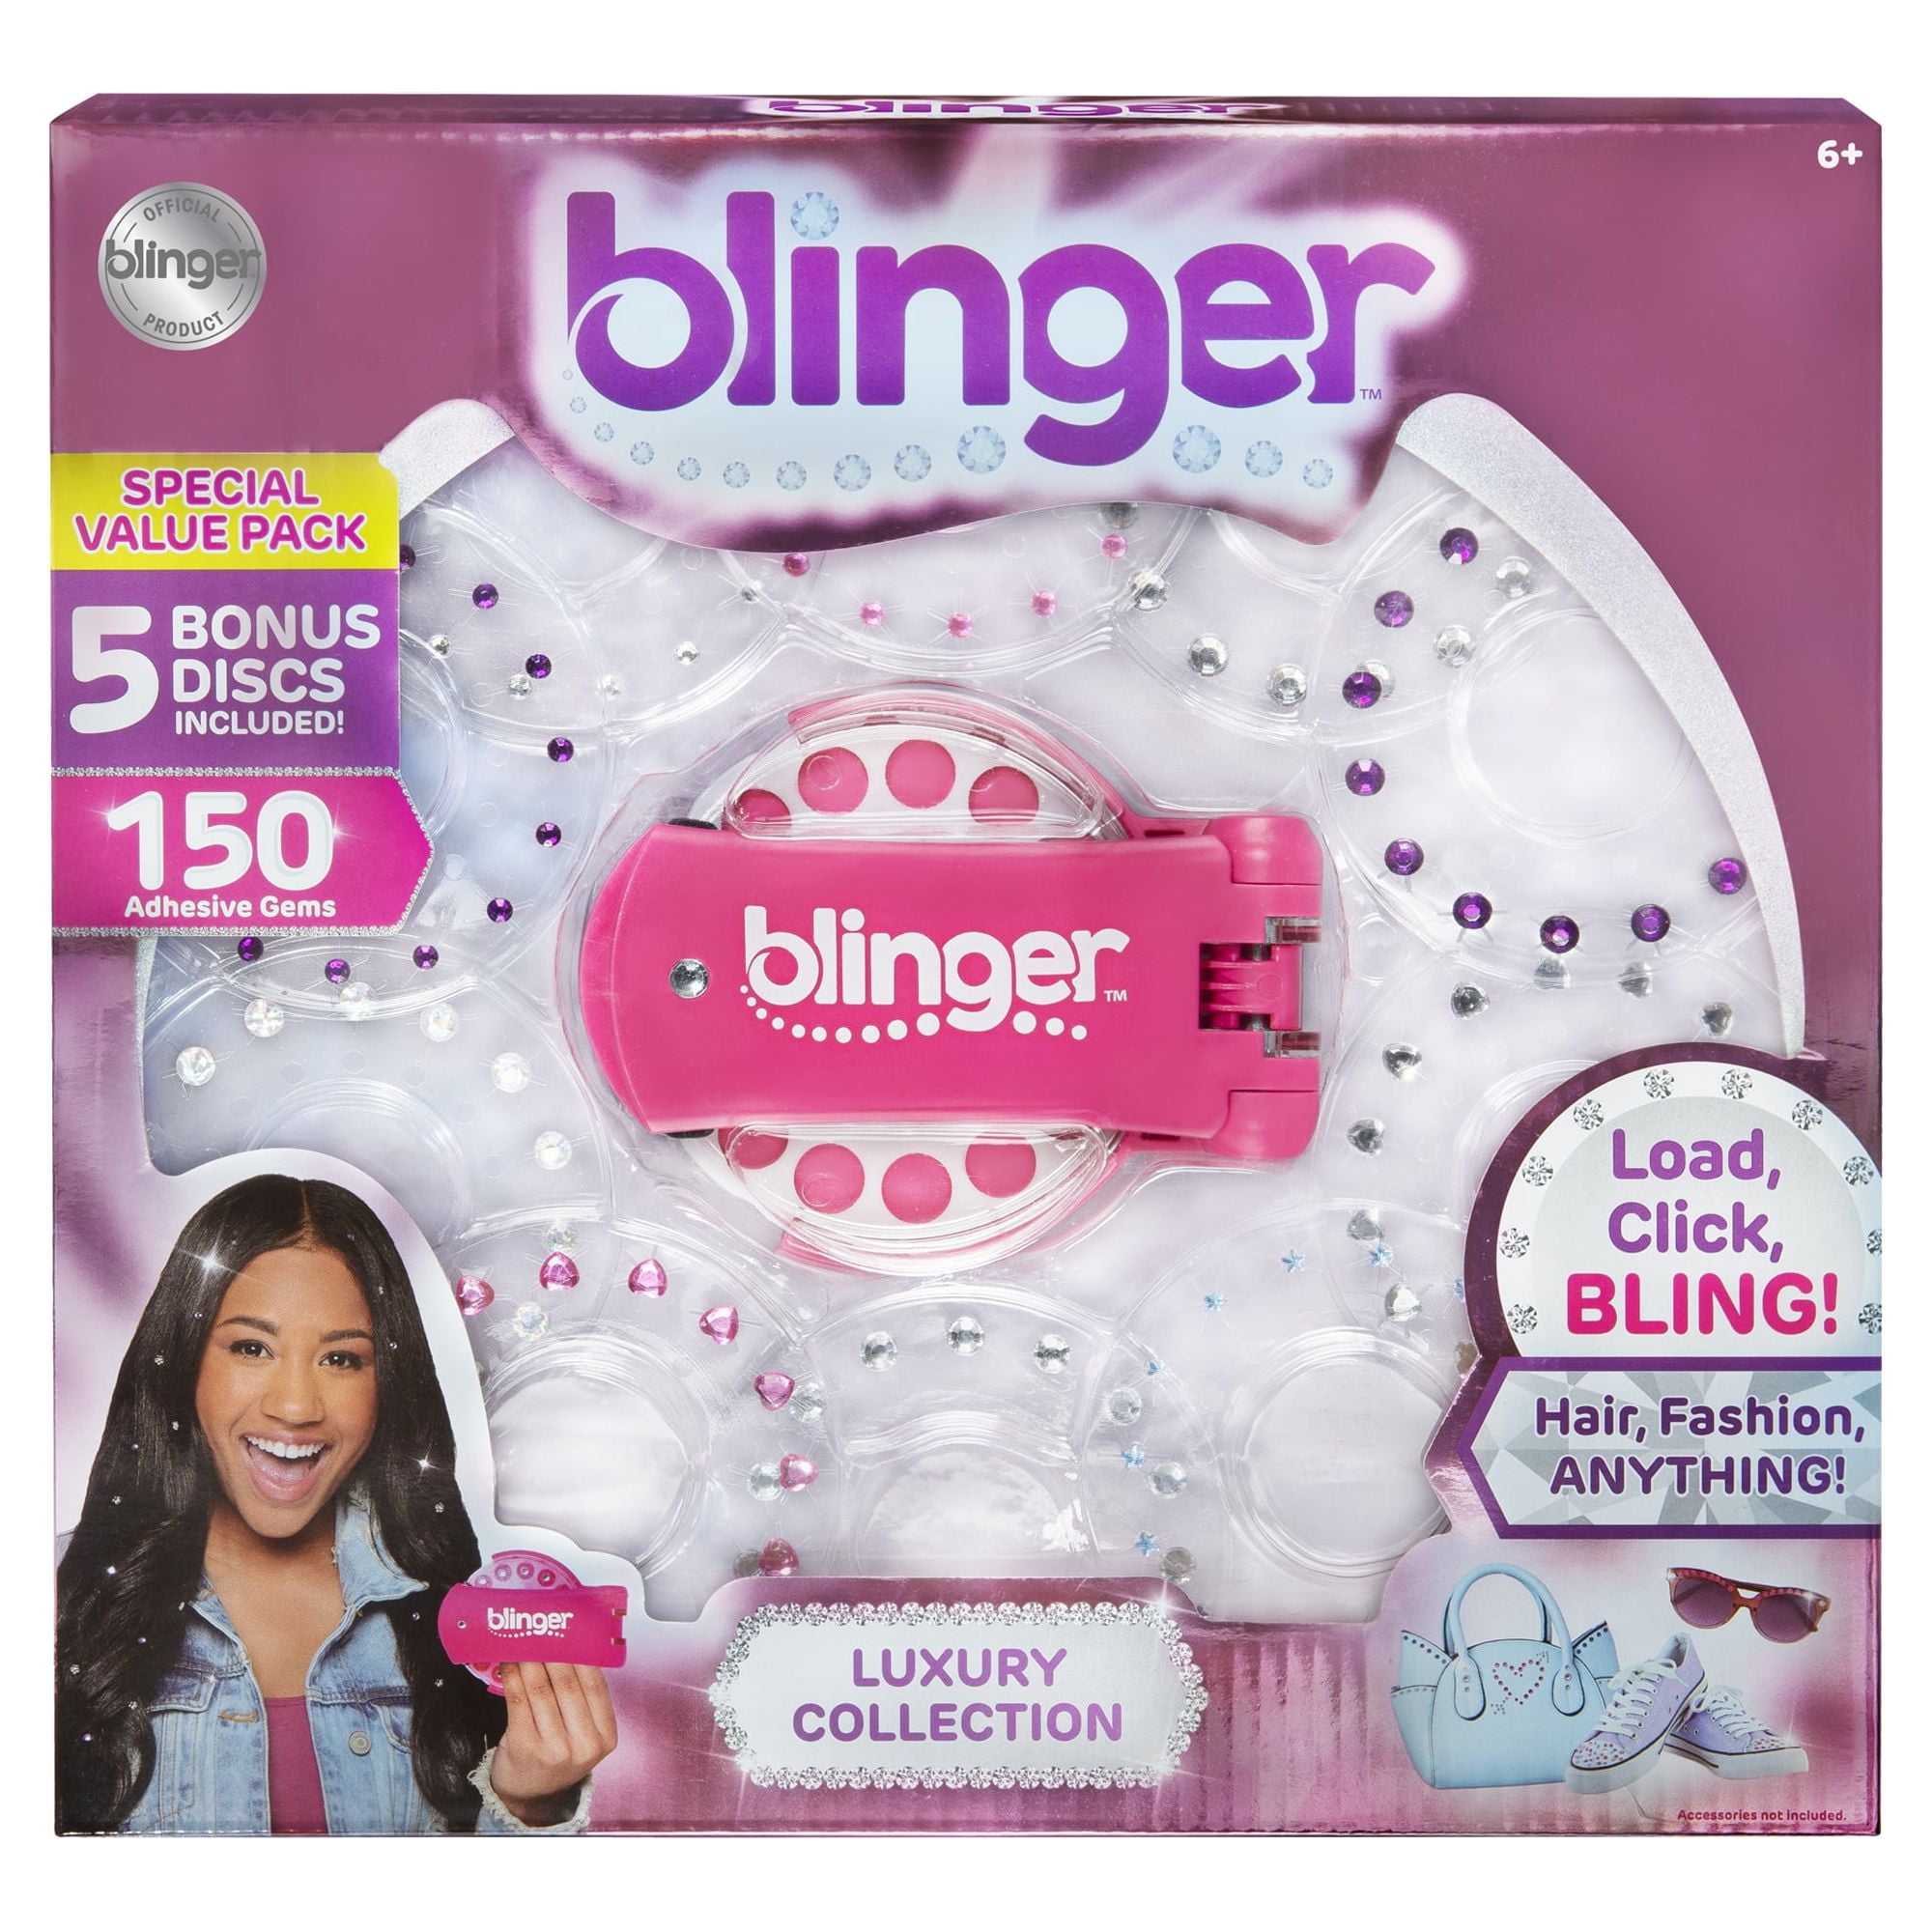 Wicked Cool Toys Launches Blinger Glam Styling Tool - The Toy Book